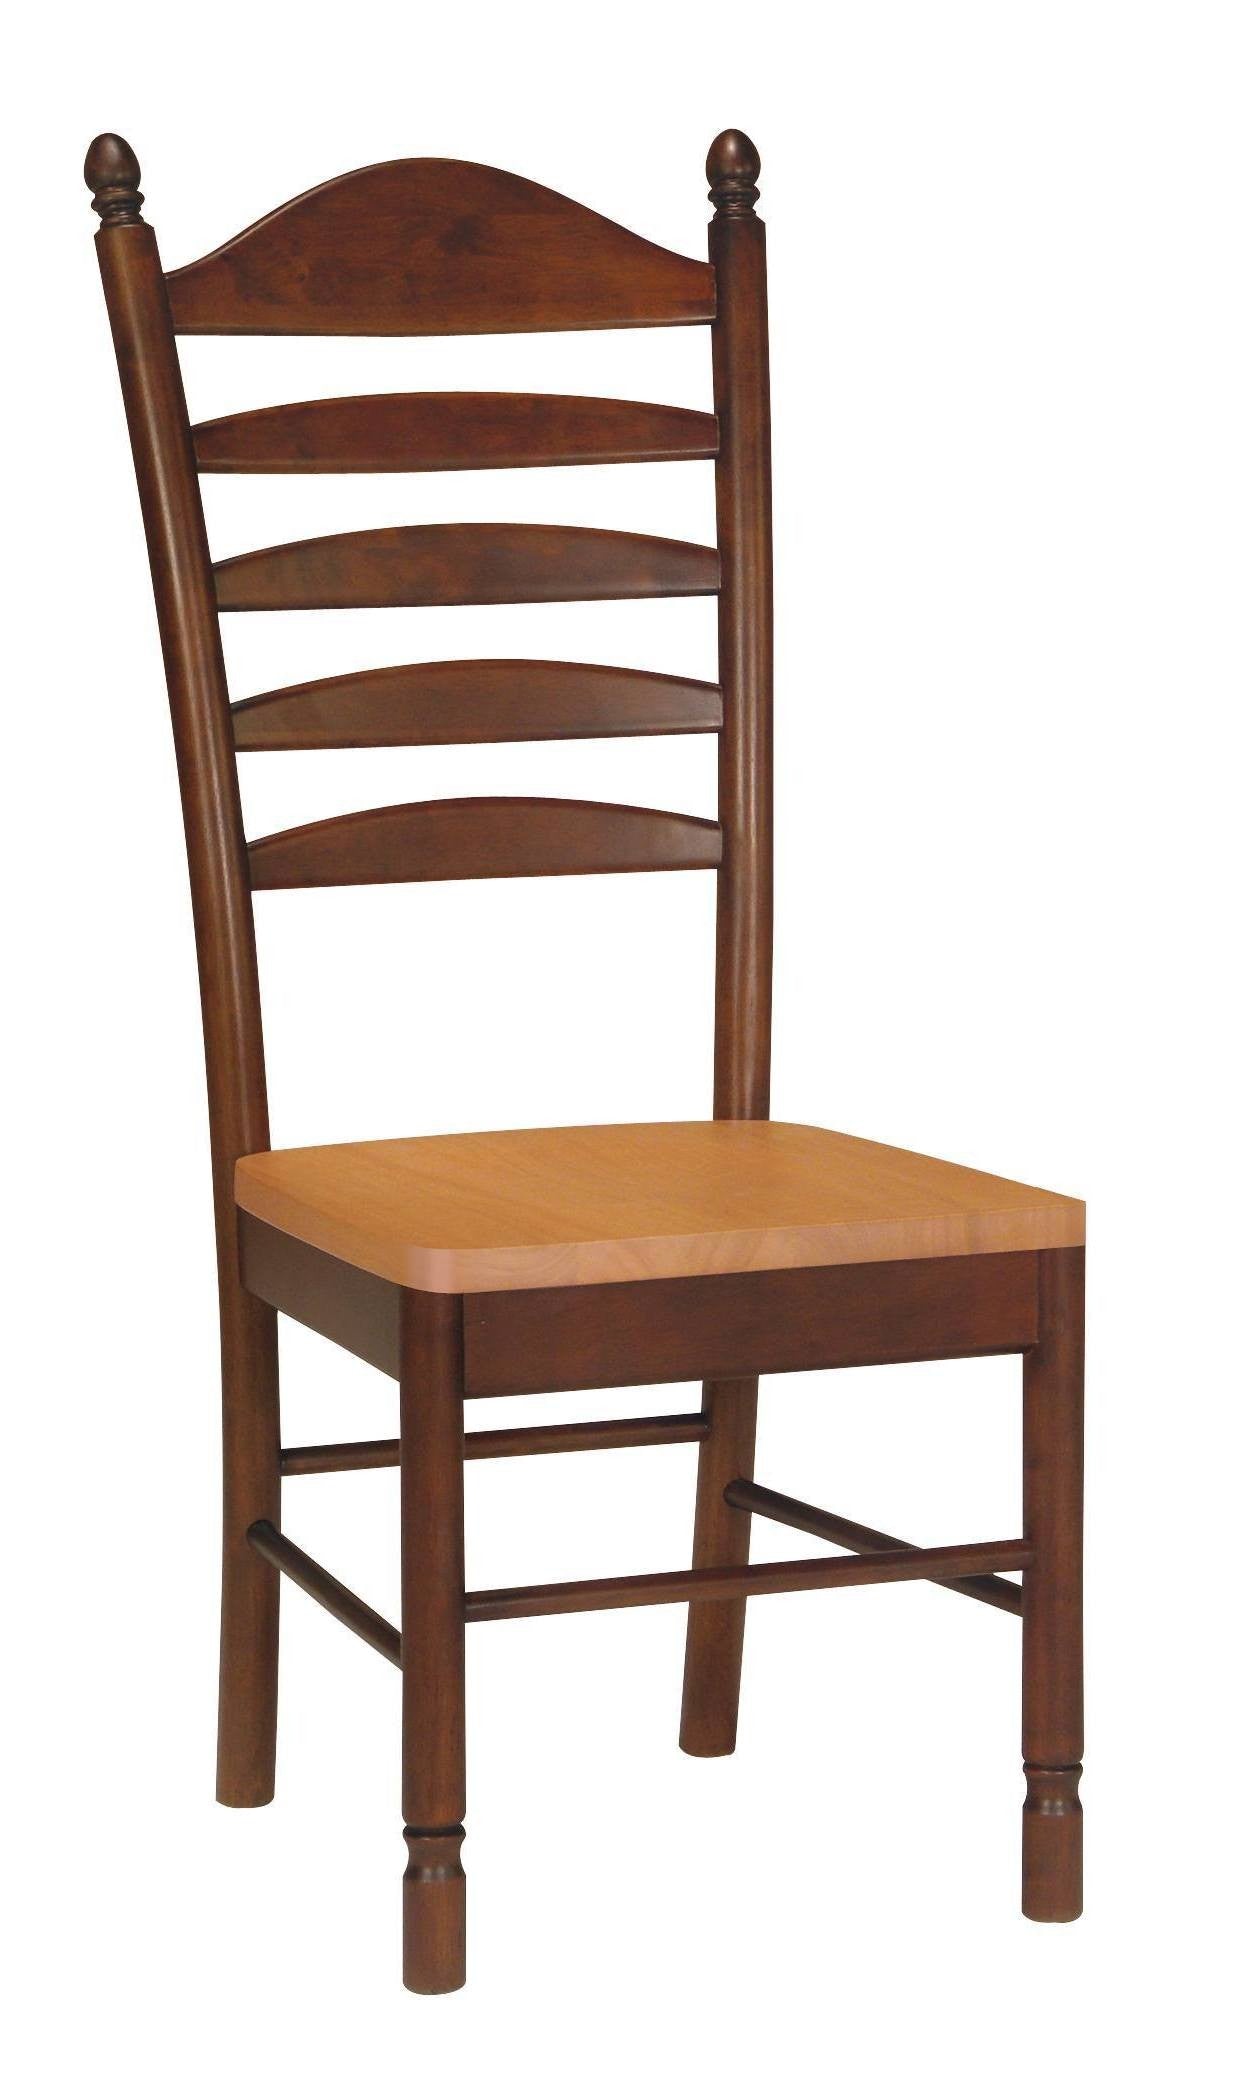 Bedford Ladderback Side Chairs